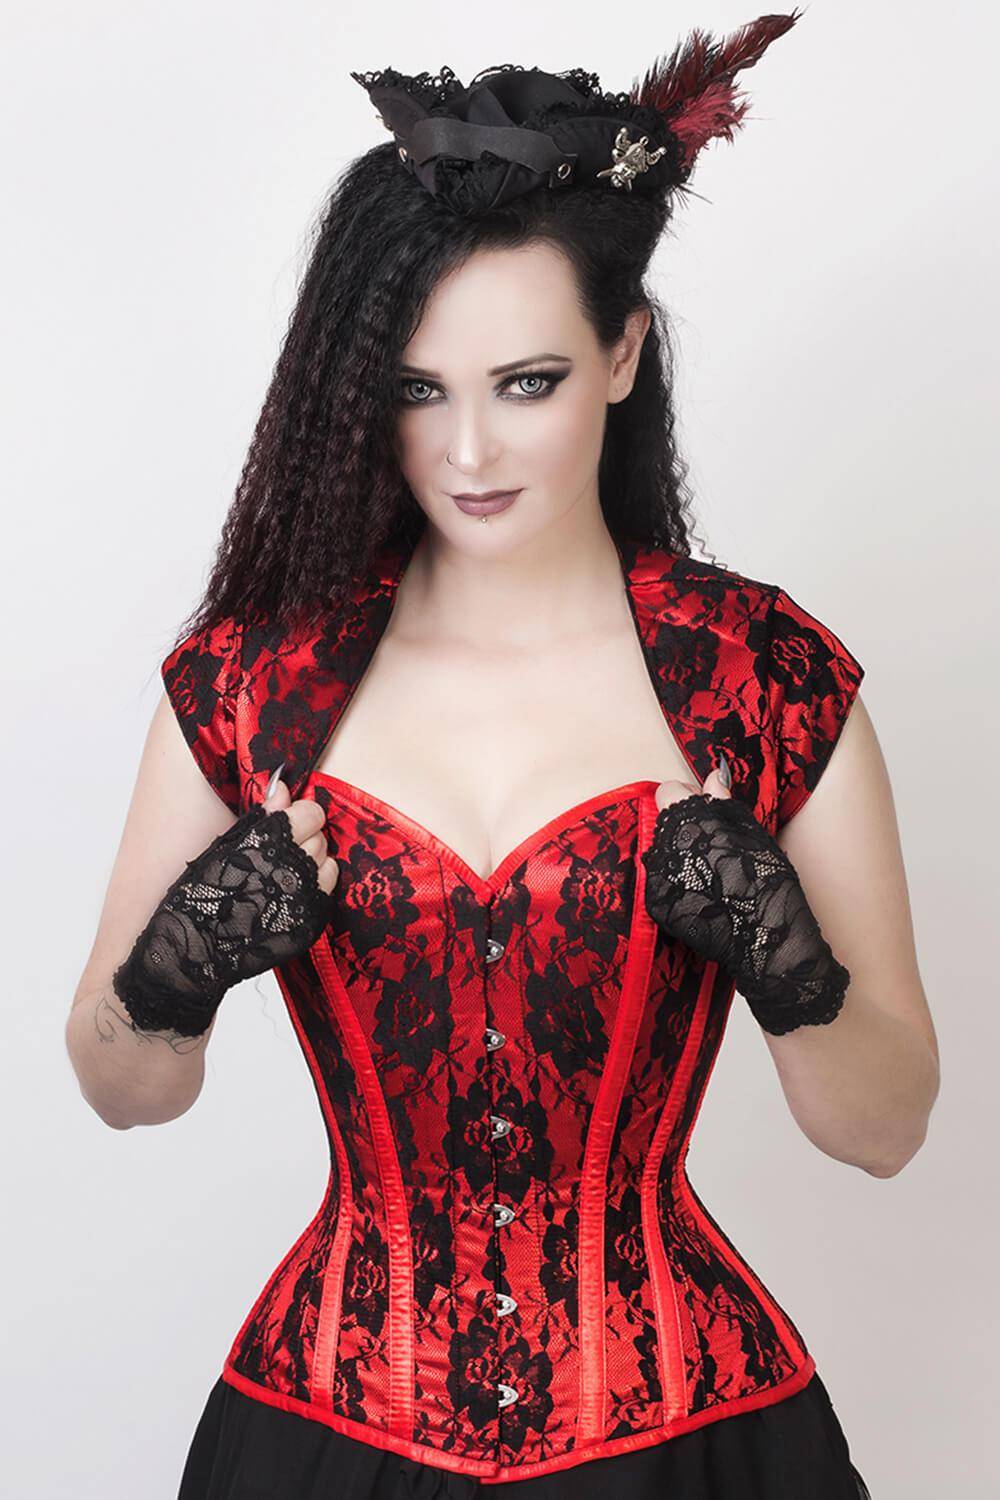 Selecting the Ideal Material, Color, and More for Top Stealth Corsets